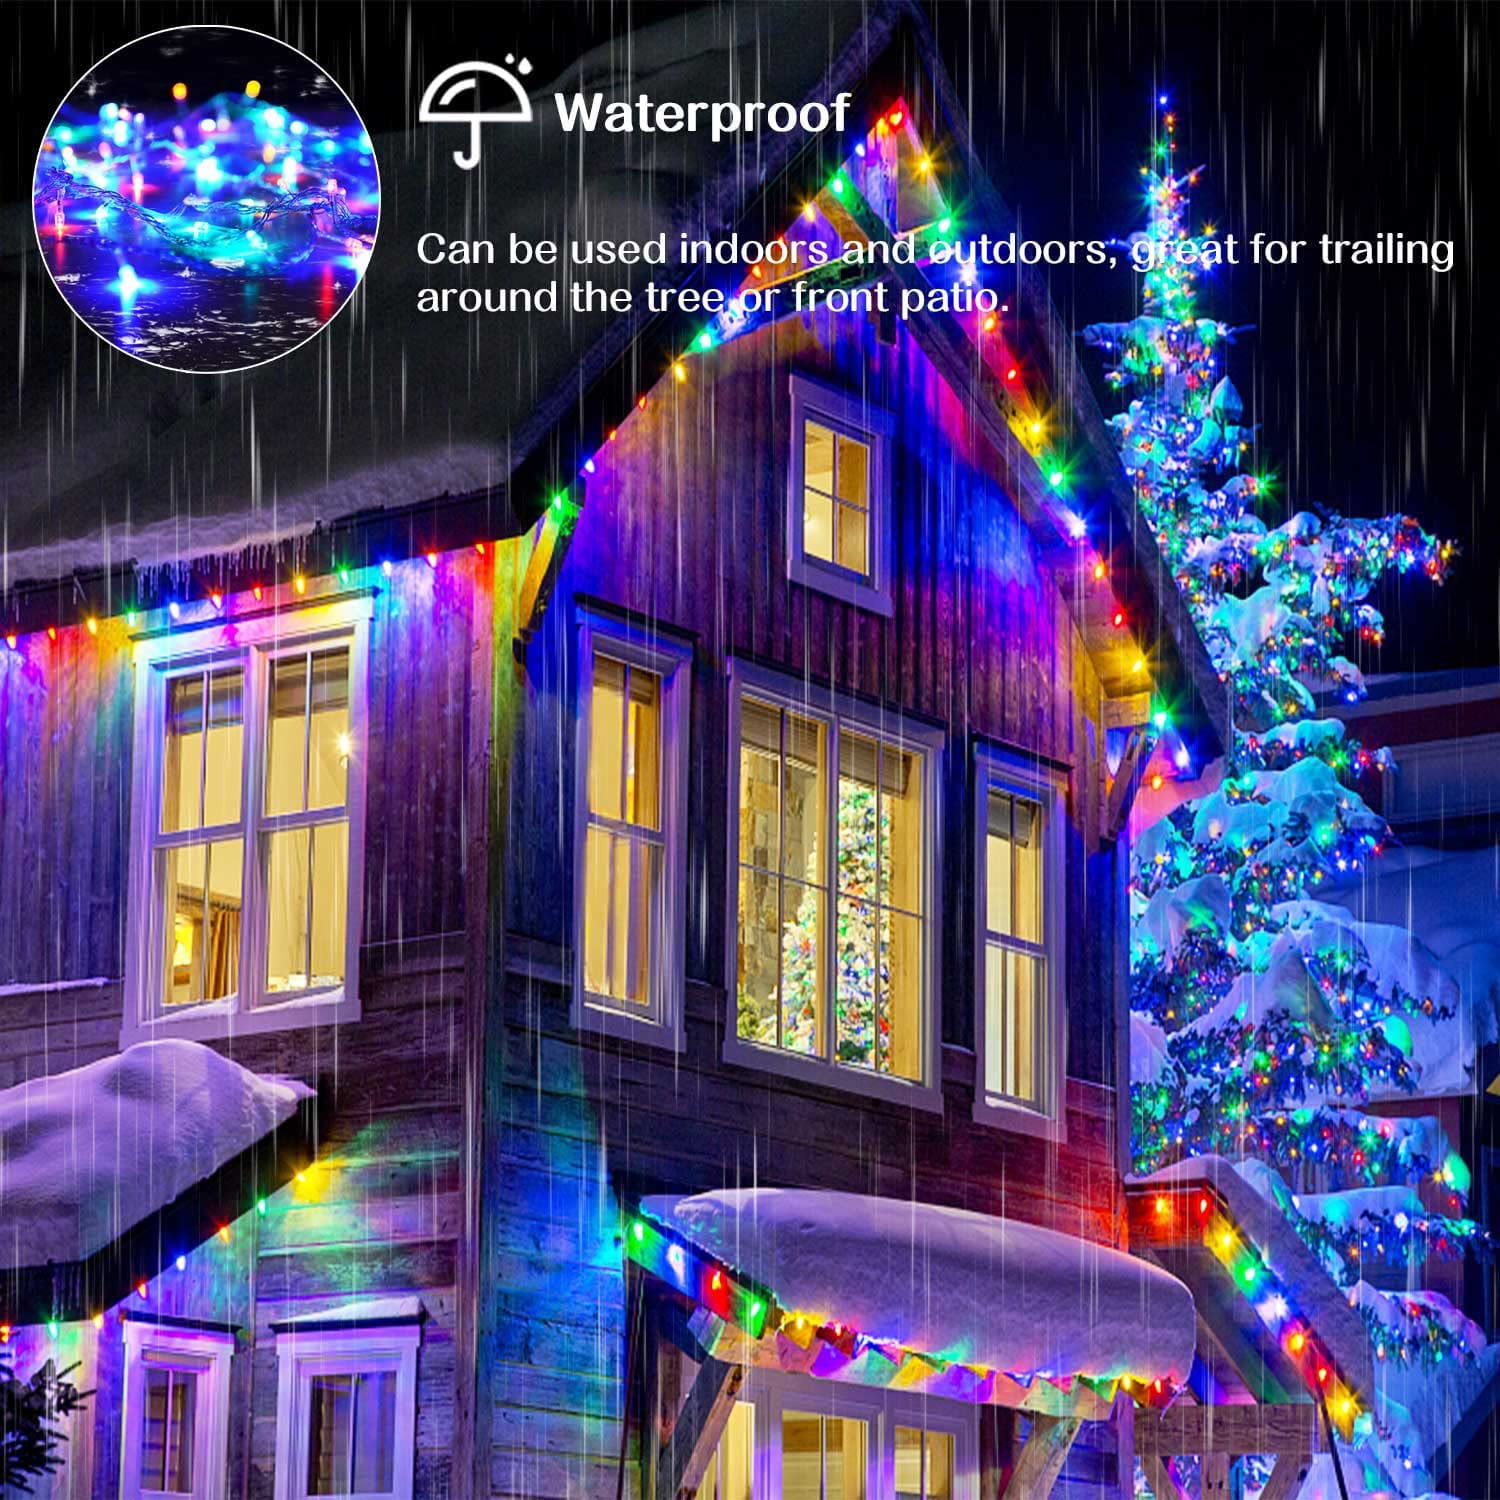 QZYL 410 FT Christmas Lights Outdoor, 1000 LED Long Blue Christmas Lights  Decorations, Waterproof Ch…See more QZYL 410 FT Christmas Lights Outdoor